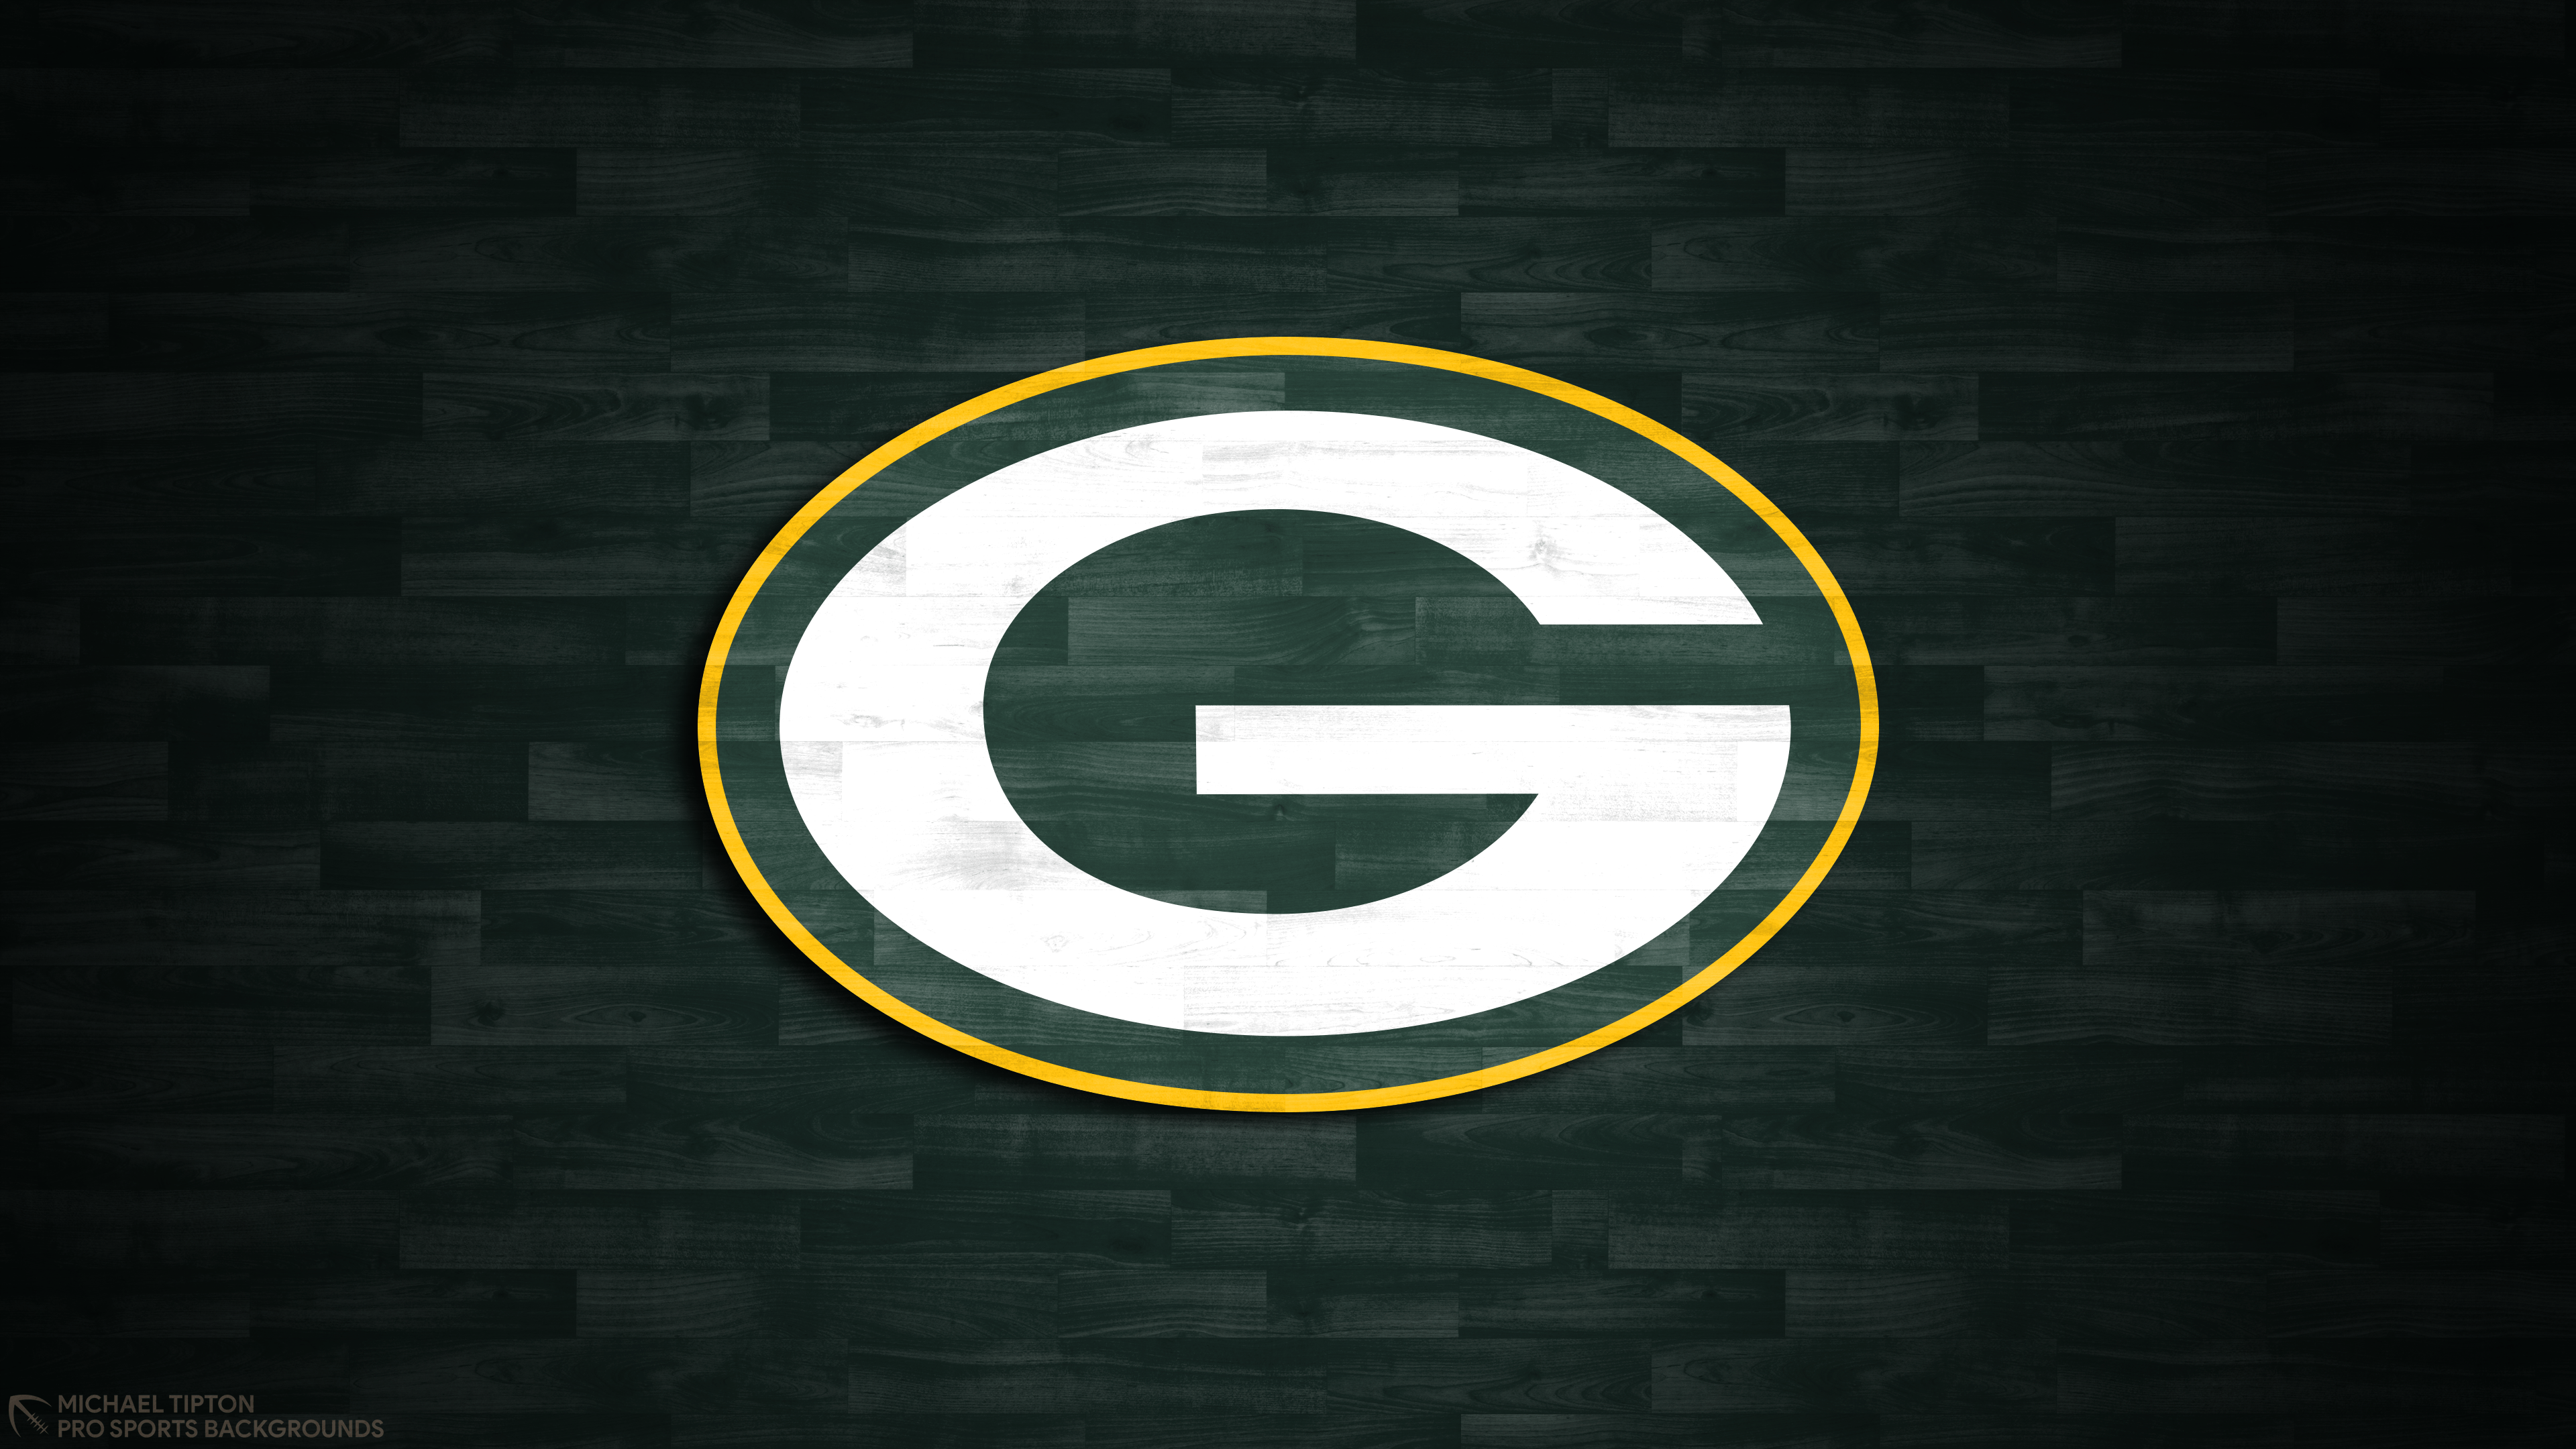 Green Bay Packers Wallpaper. Pro Sports Background